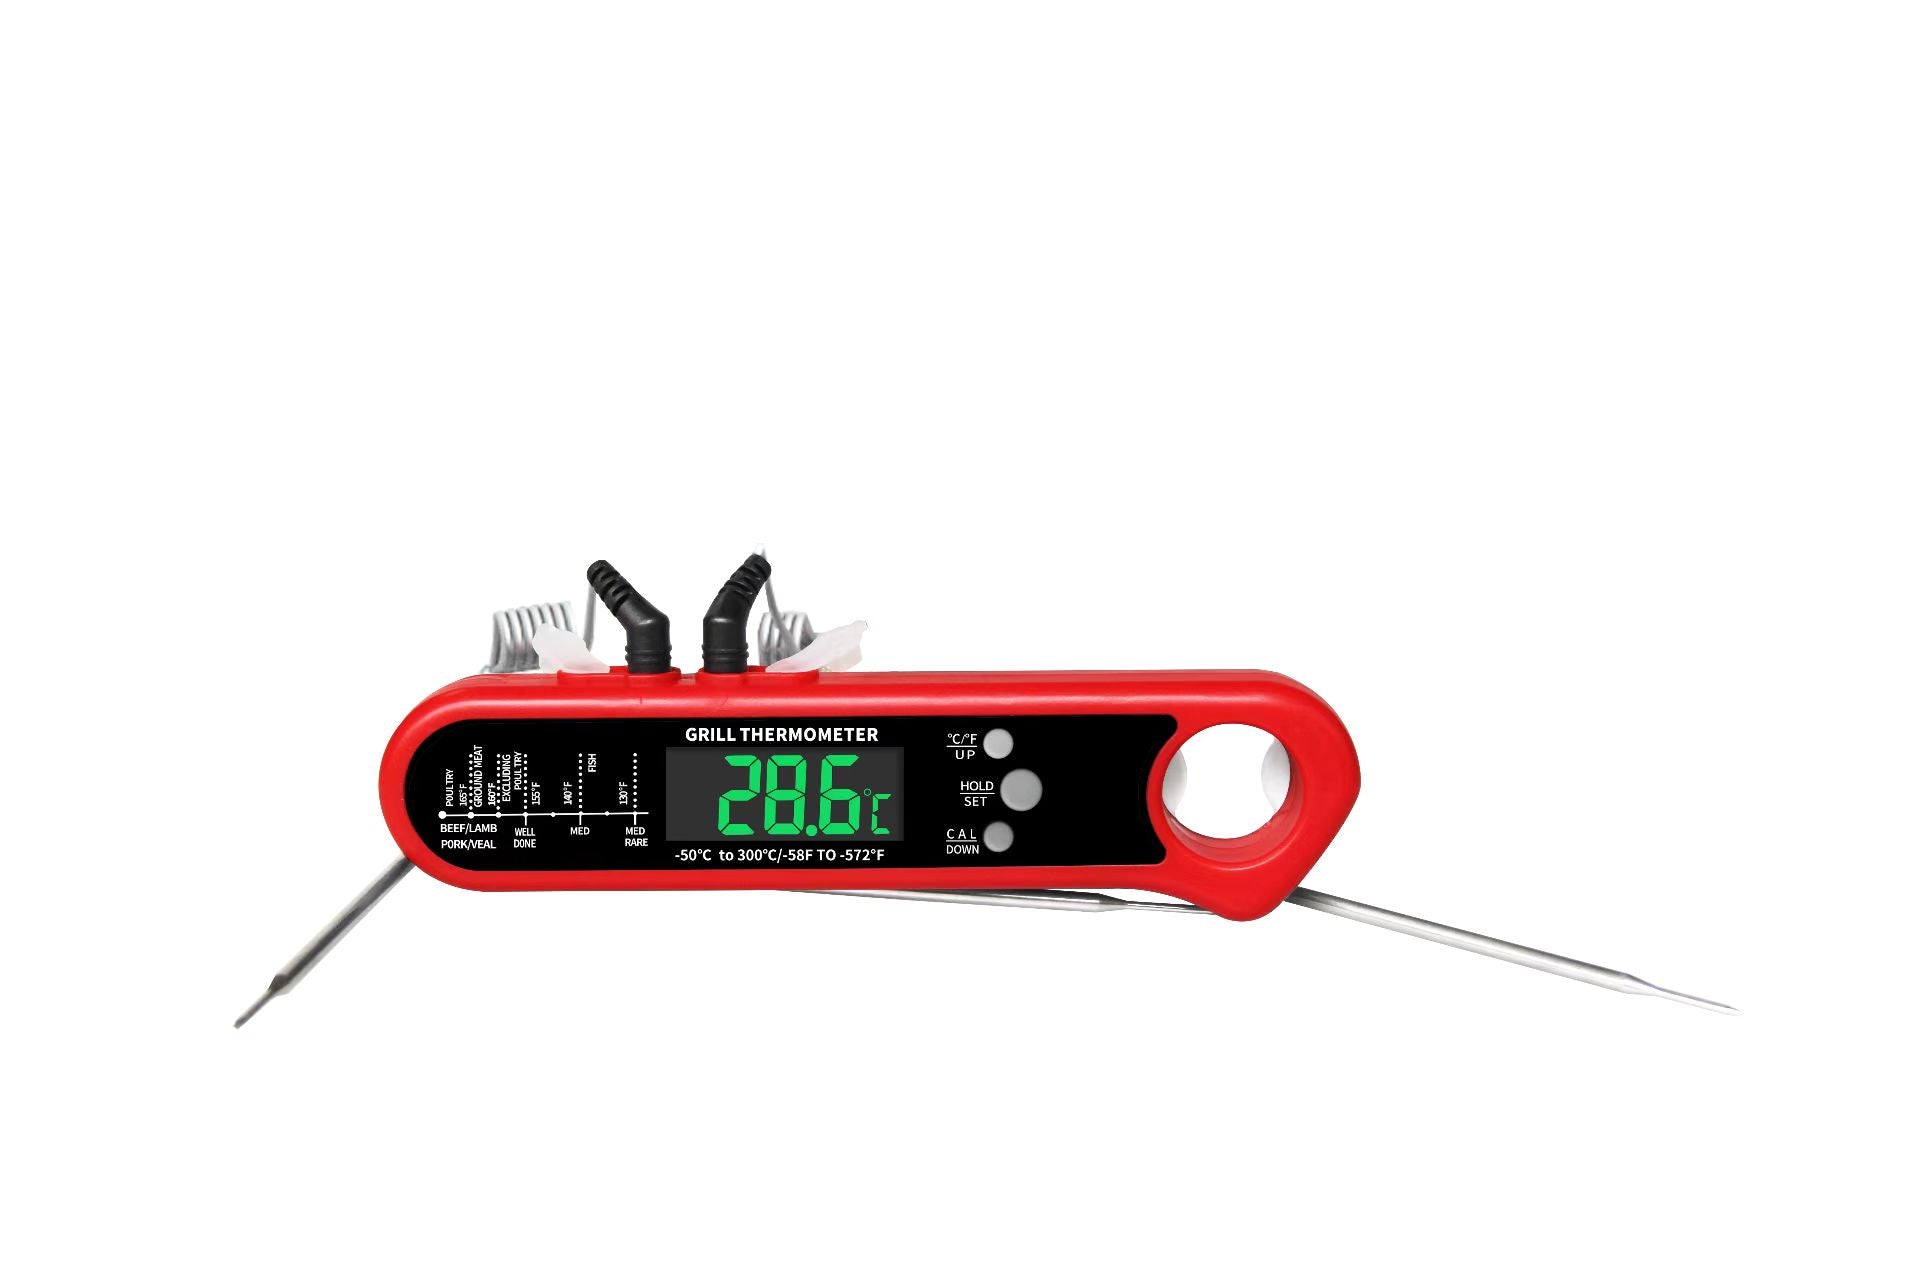 Leave-in Digital Meat Thermometer